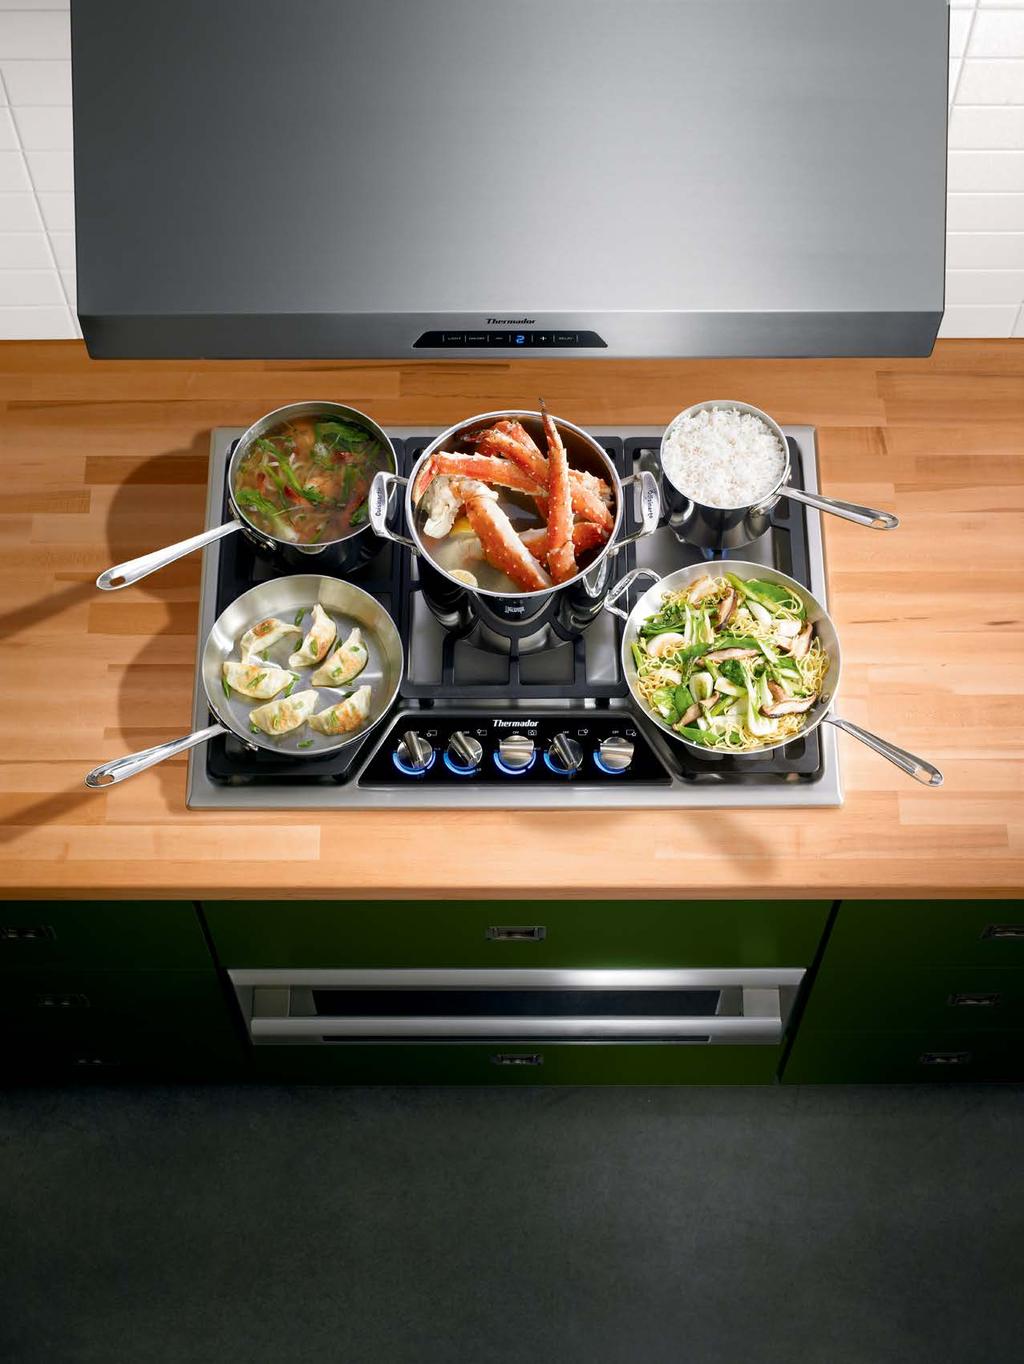 MASTERPIECE DESIGN With chiseled edges and a trapezoid control panel, these cooktops were designed to coordinate perfectly with the entire Masterpiece line of appliances.